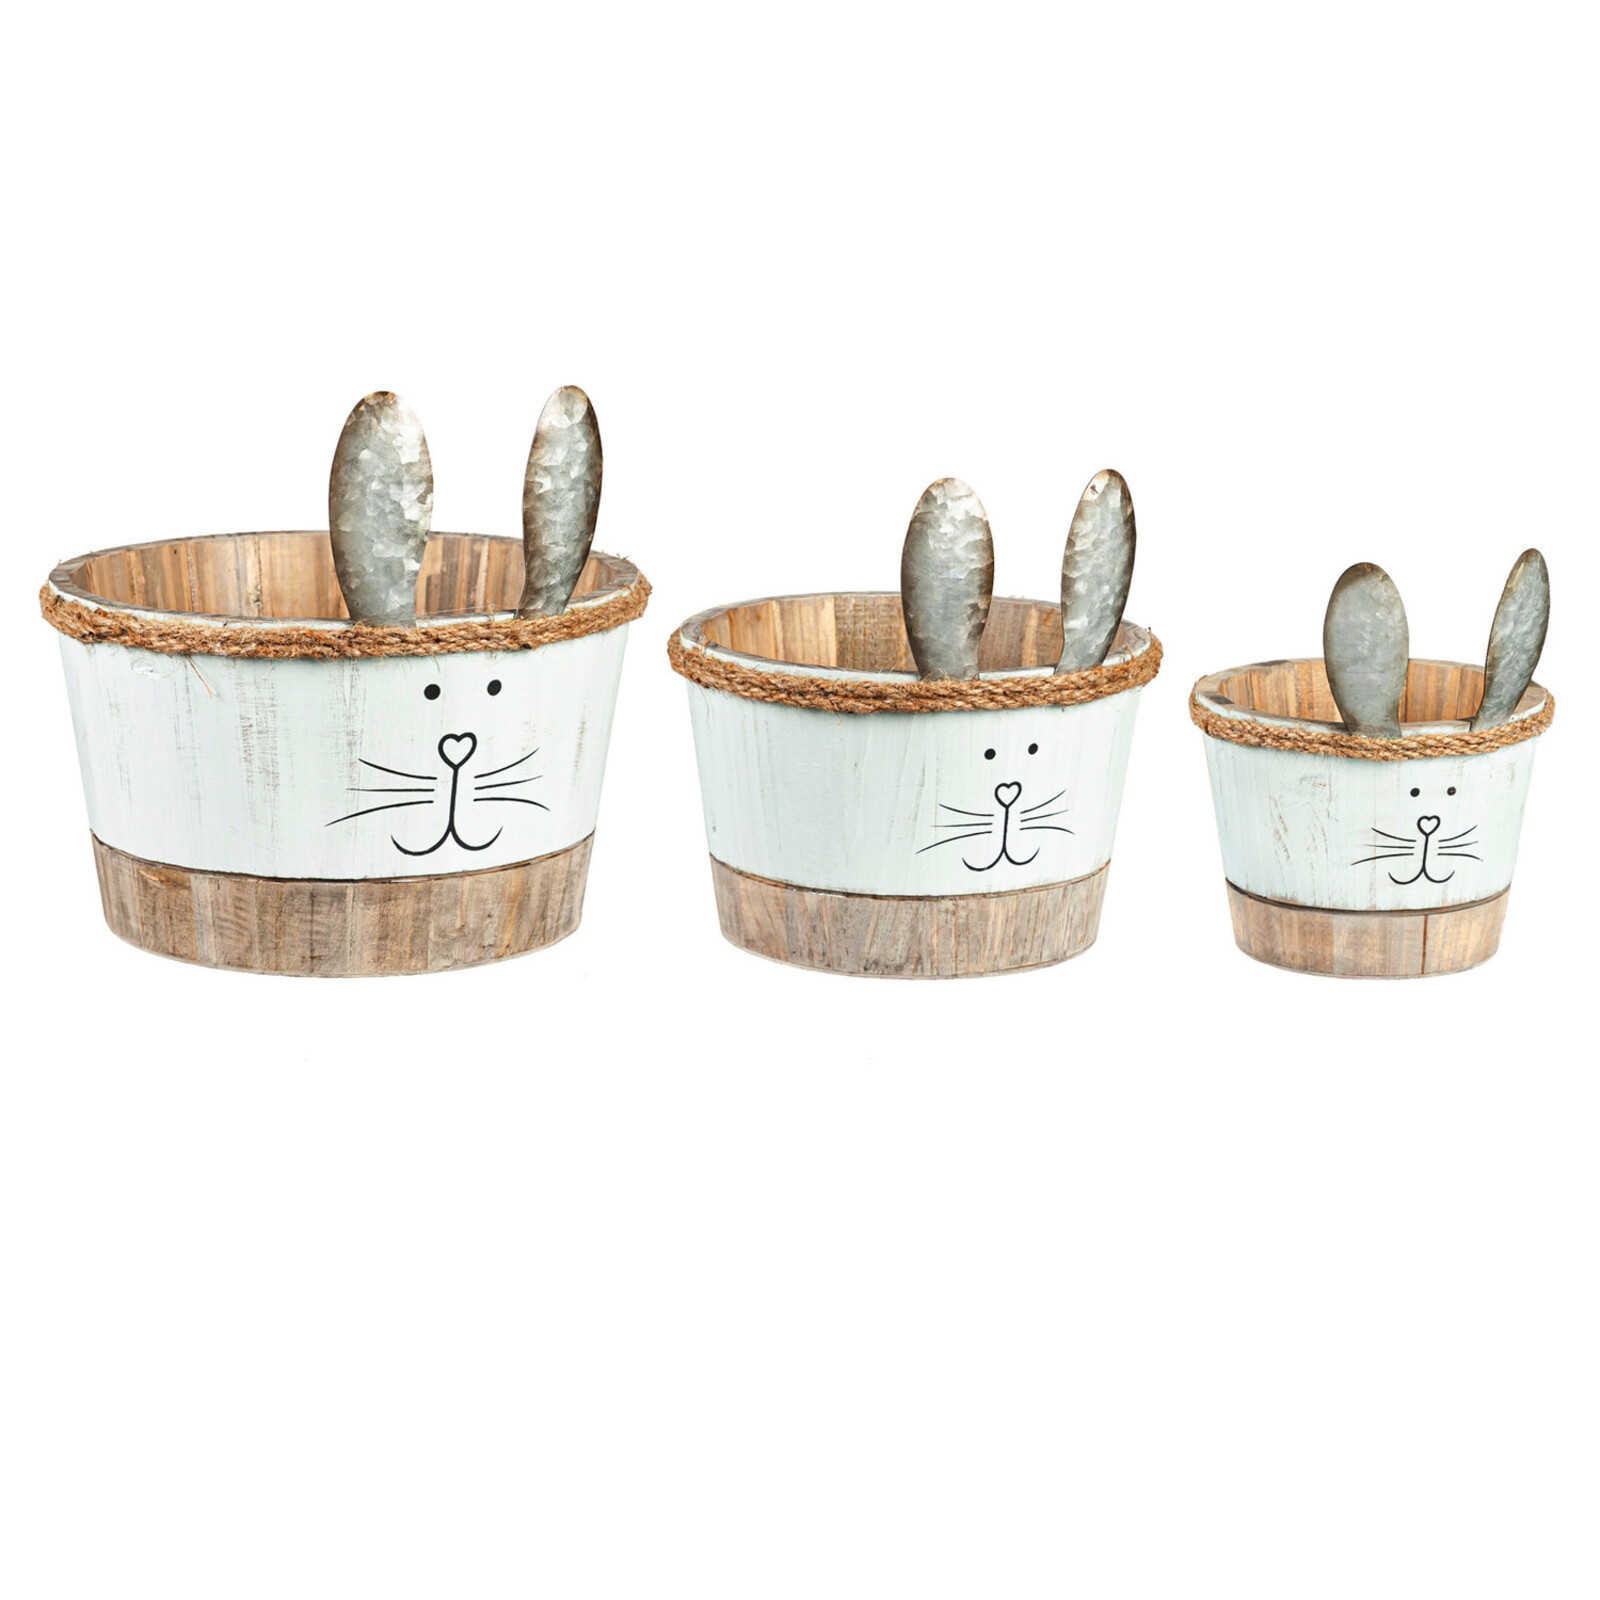 Evergreen Enterprises Wood Bunny Planter Small with Metal Ears    8PMTL5325S loading=